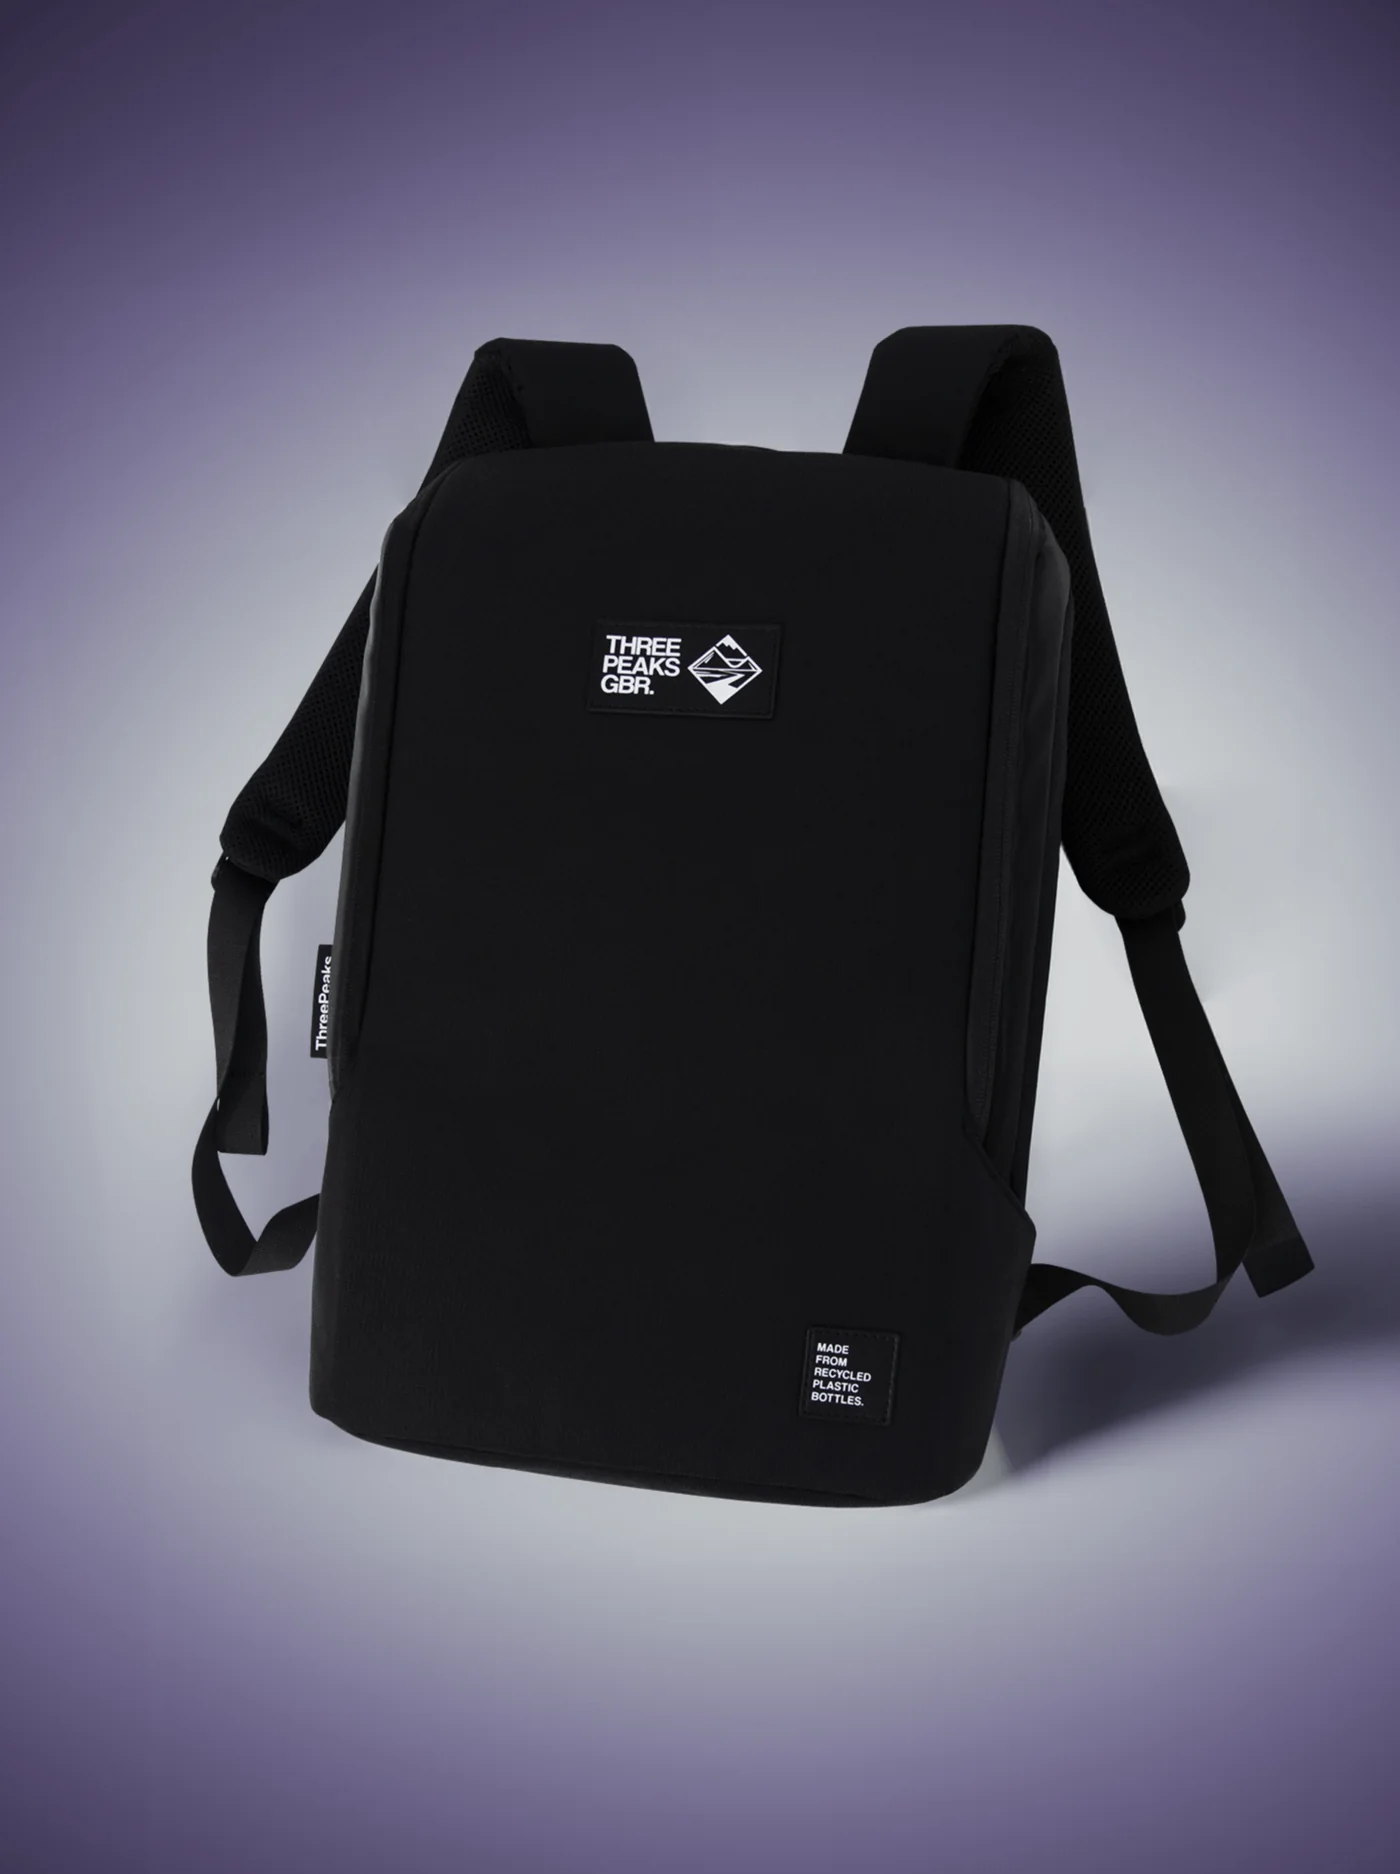 Three Peaks GBR Commuter 22L backpack in black with black tag